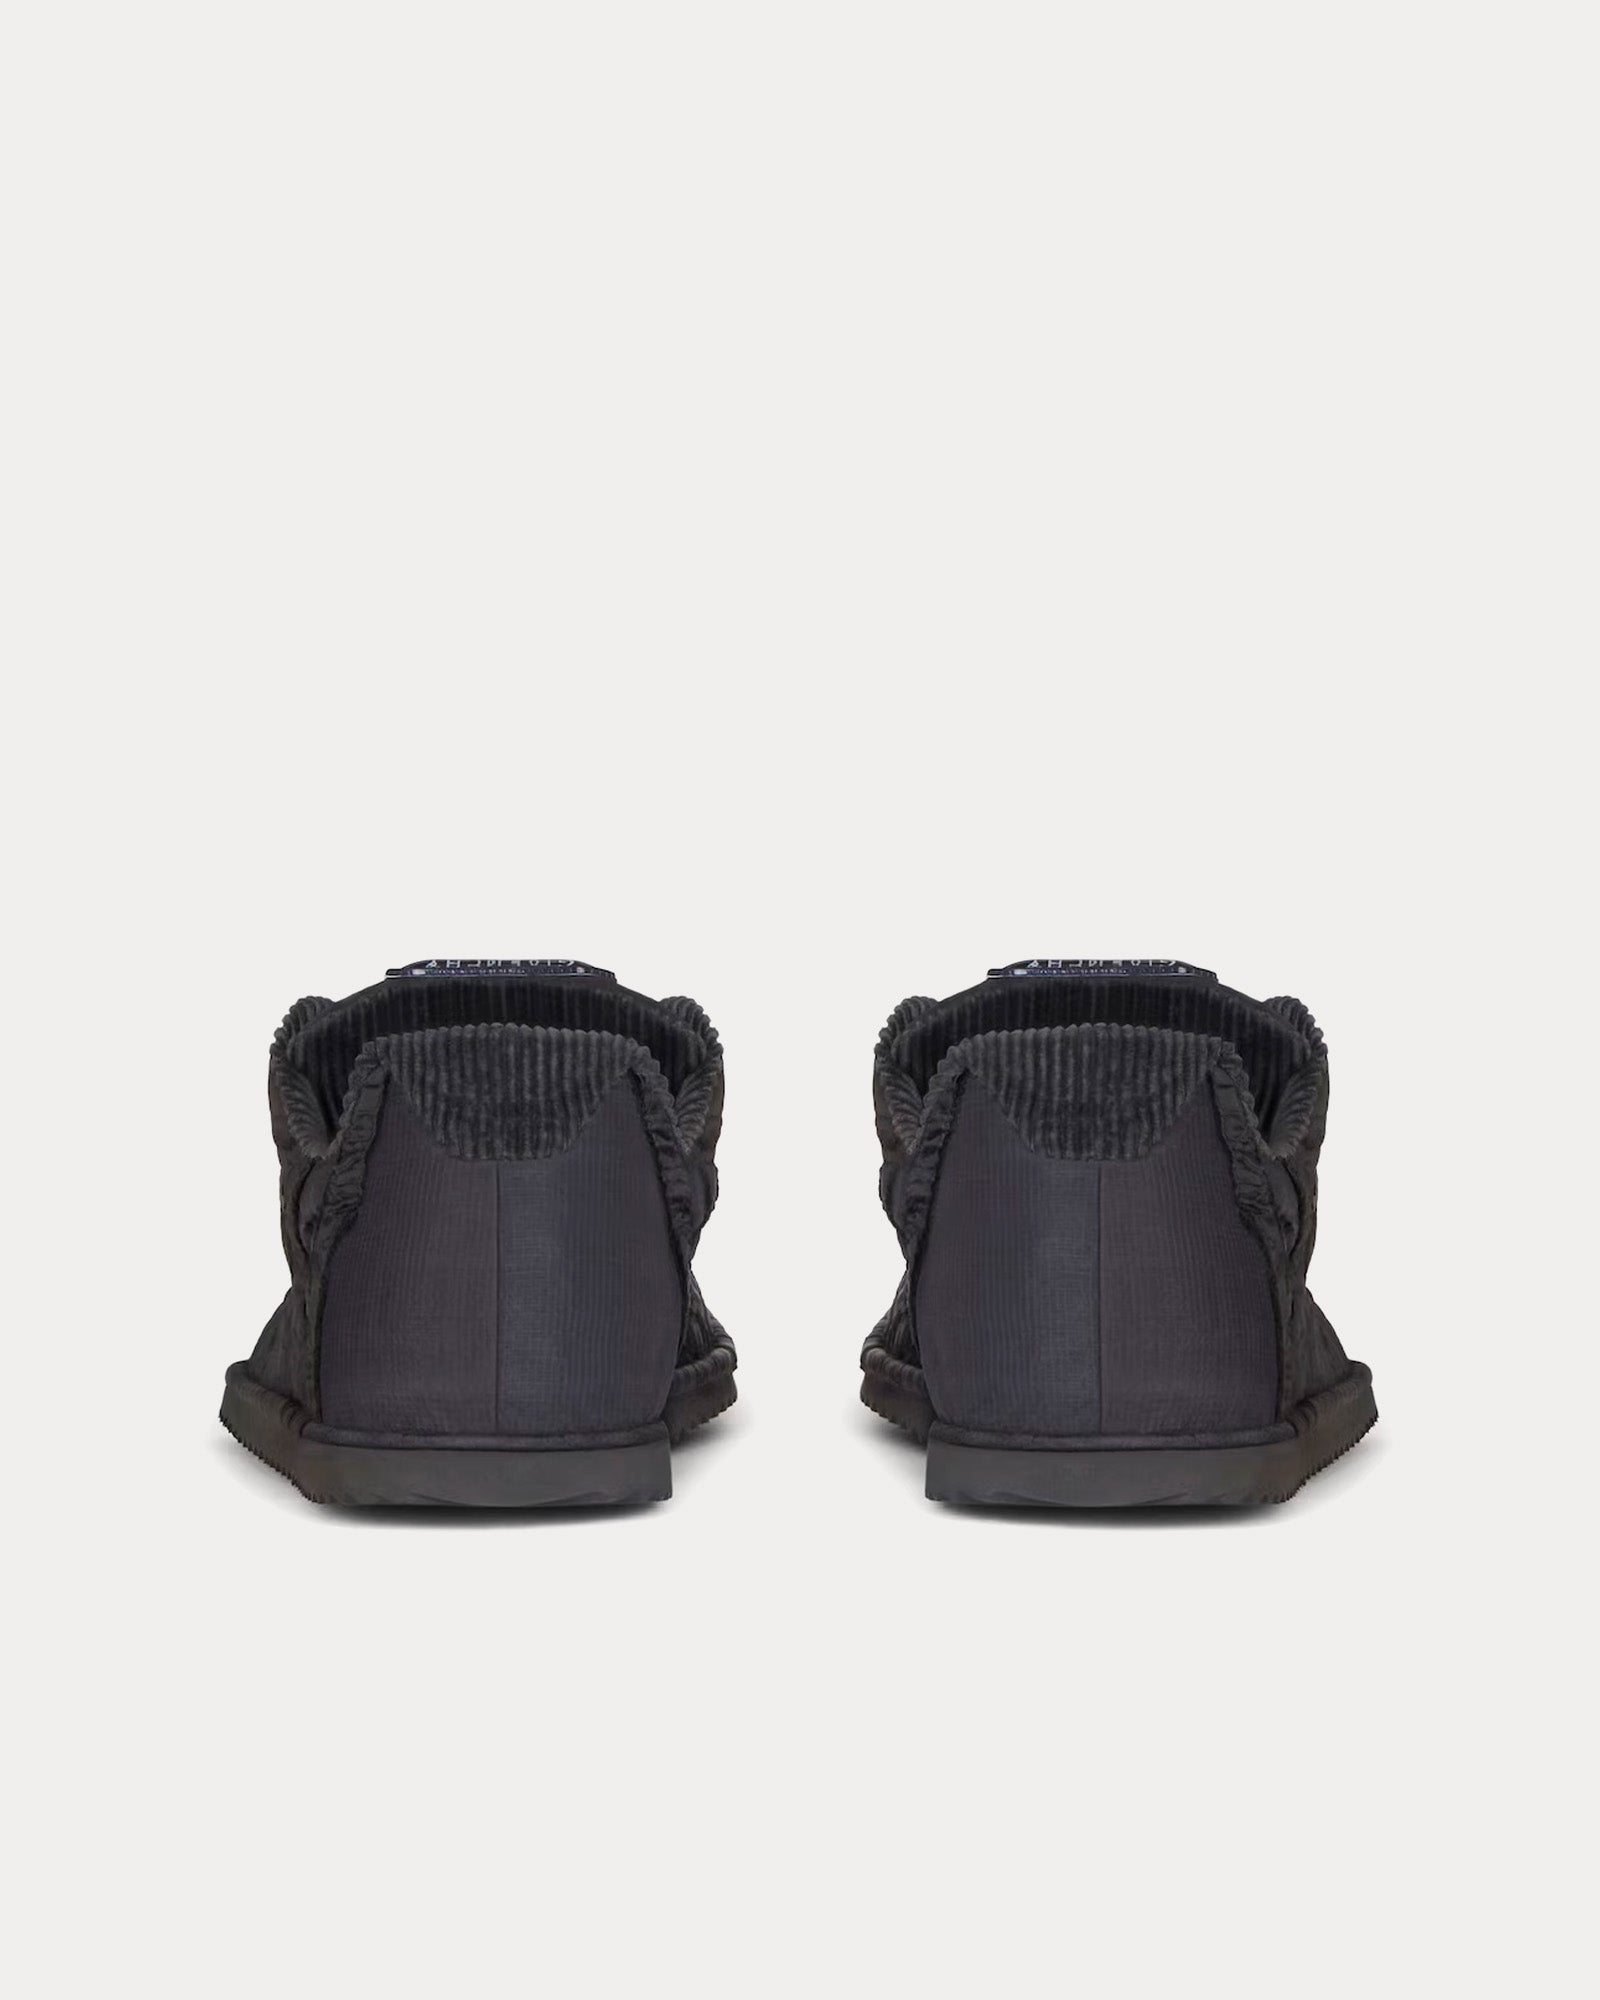 Givenchy - Flat Synthetic Fiber Black Low Top Sneakers